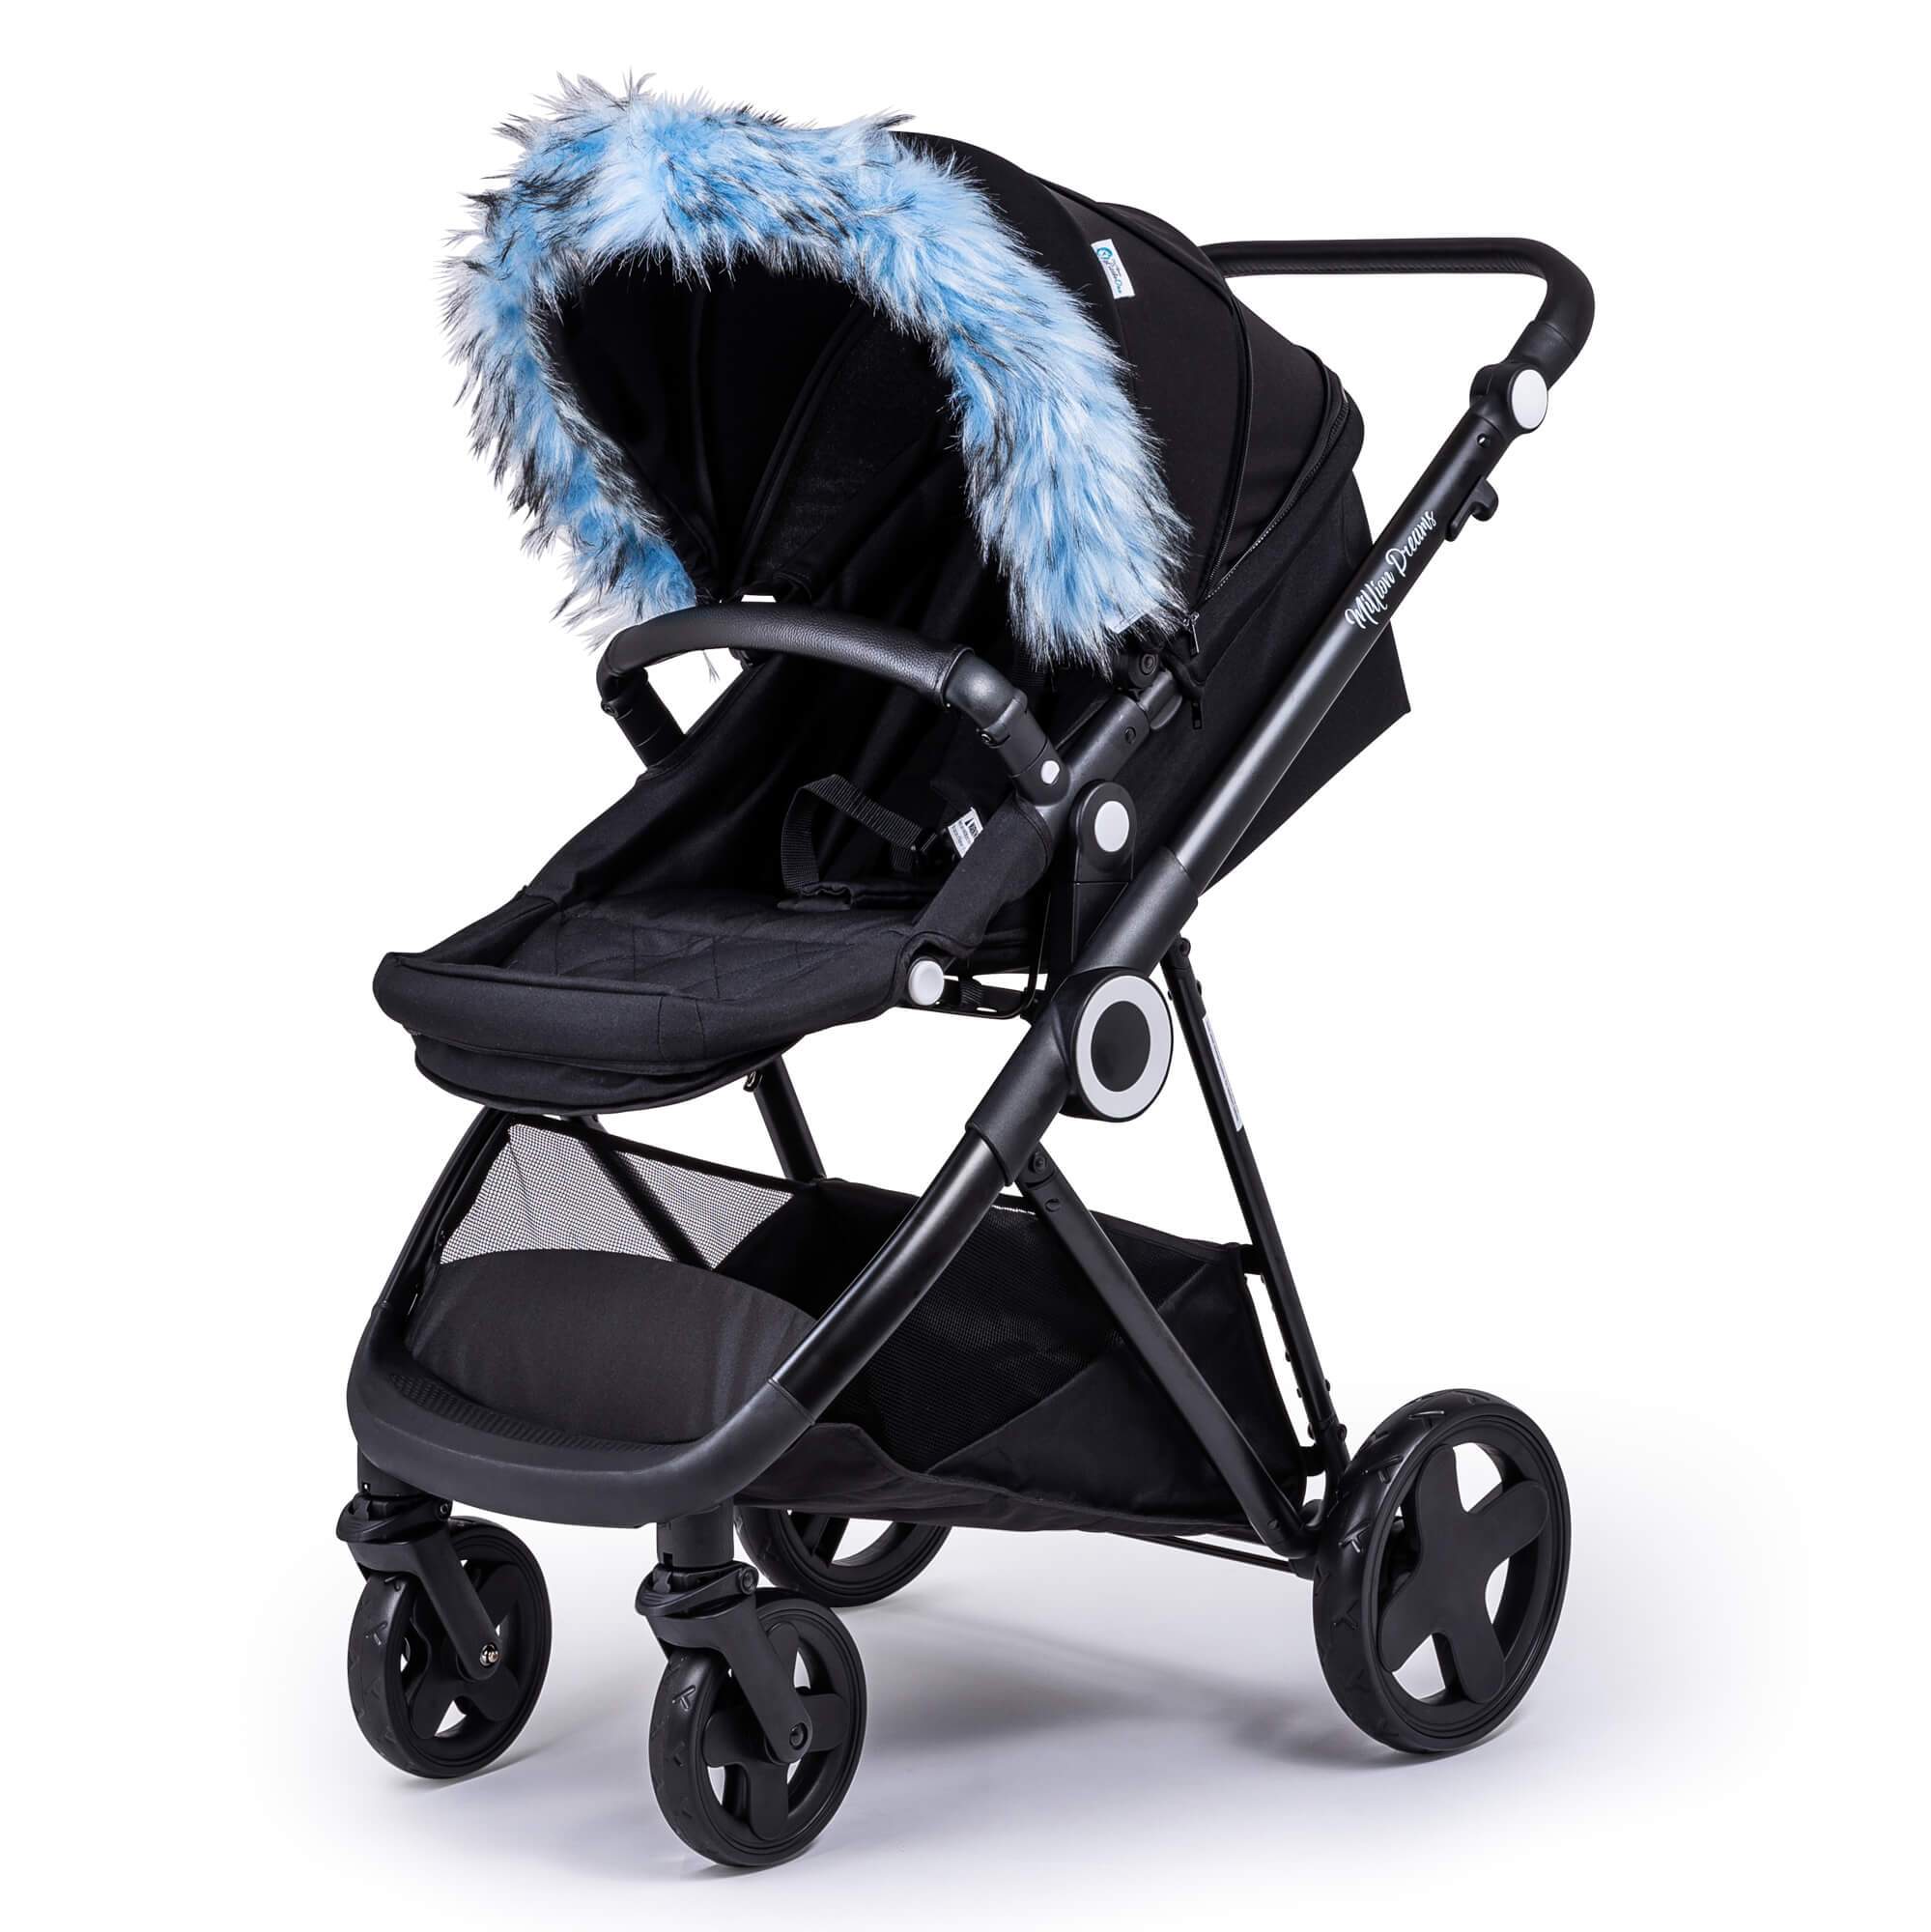 Pram Fur Hood Trim Attachment for Pushchair Compatible with Red Castle - Light Blue / Fits All Models | For Your Little One